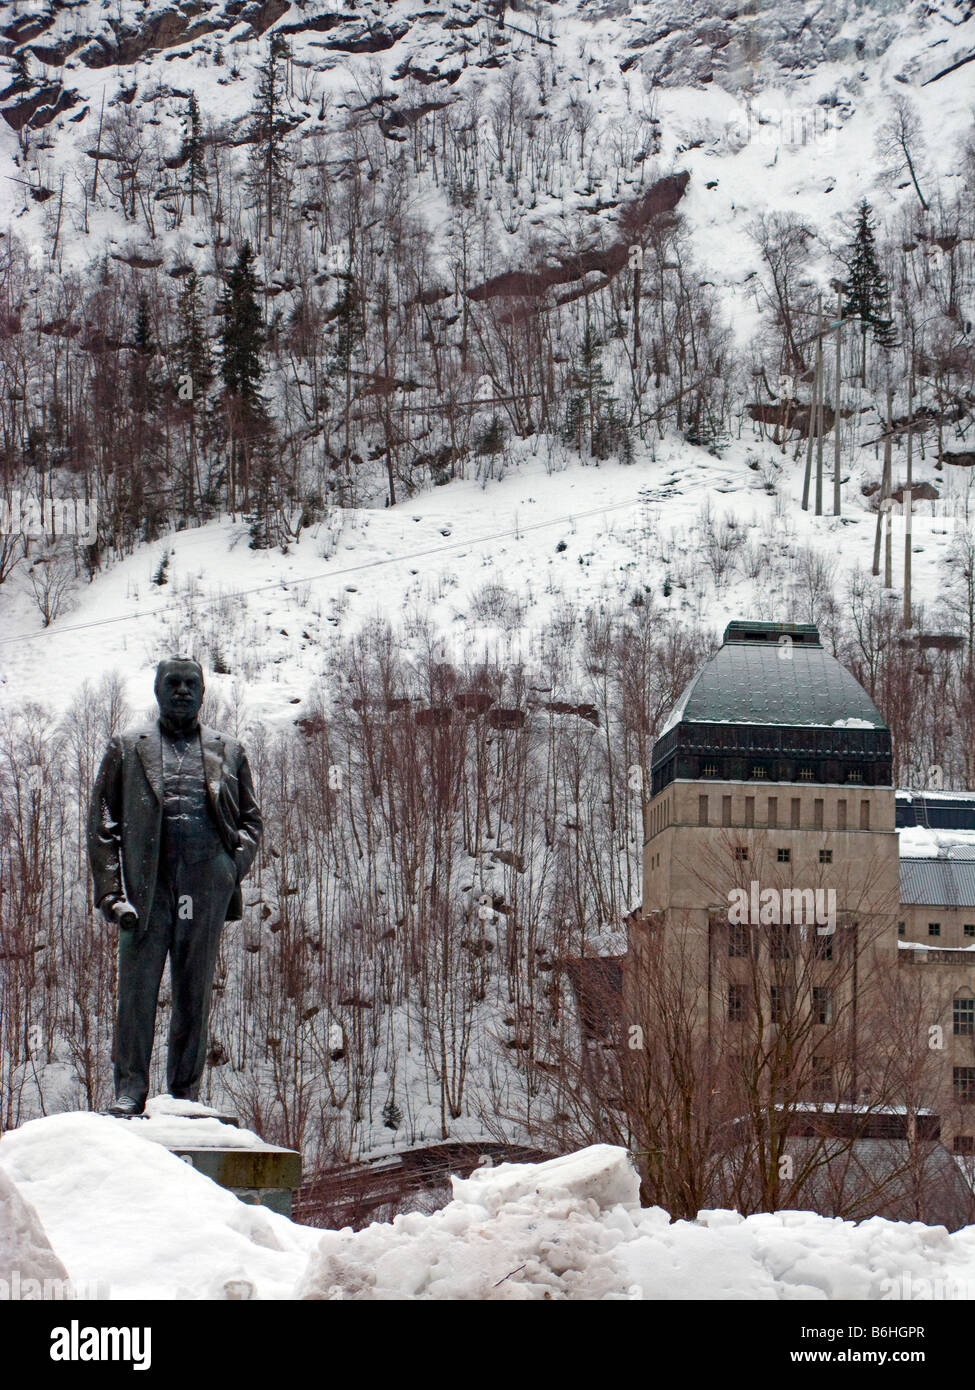 A statue of Sam Eyde, the founder of early hydro electric industry in Rjukan town centre, Såheimhallen power station behind Stock Photo